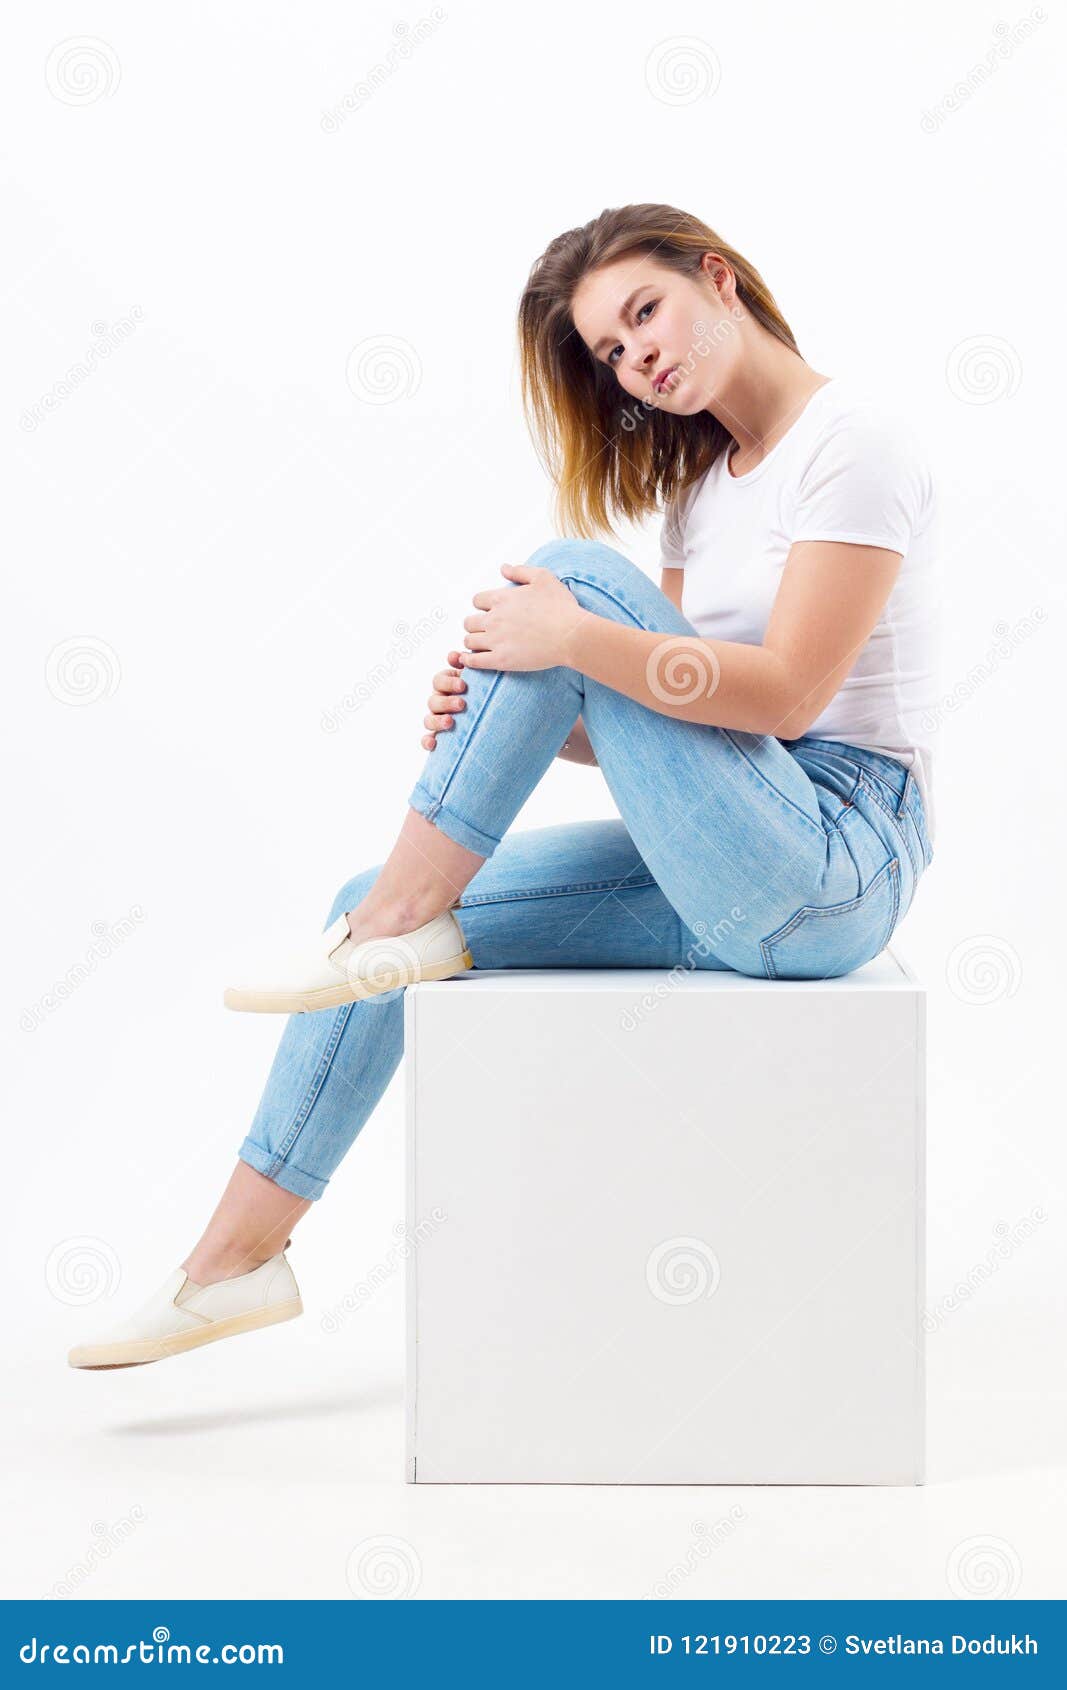 Girl Teenager in Blue Jeans Sits on Cube in White Studio Stock Image ...